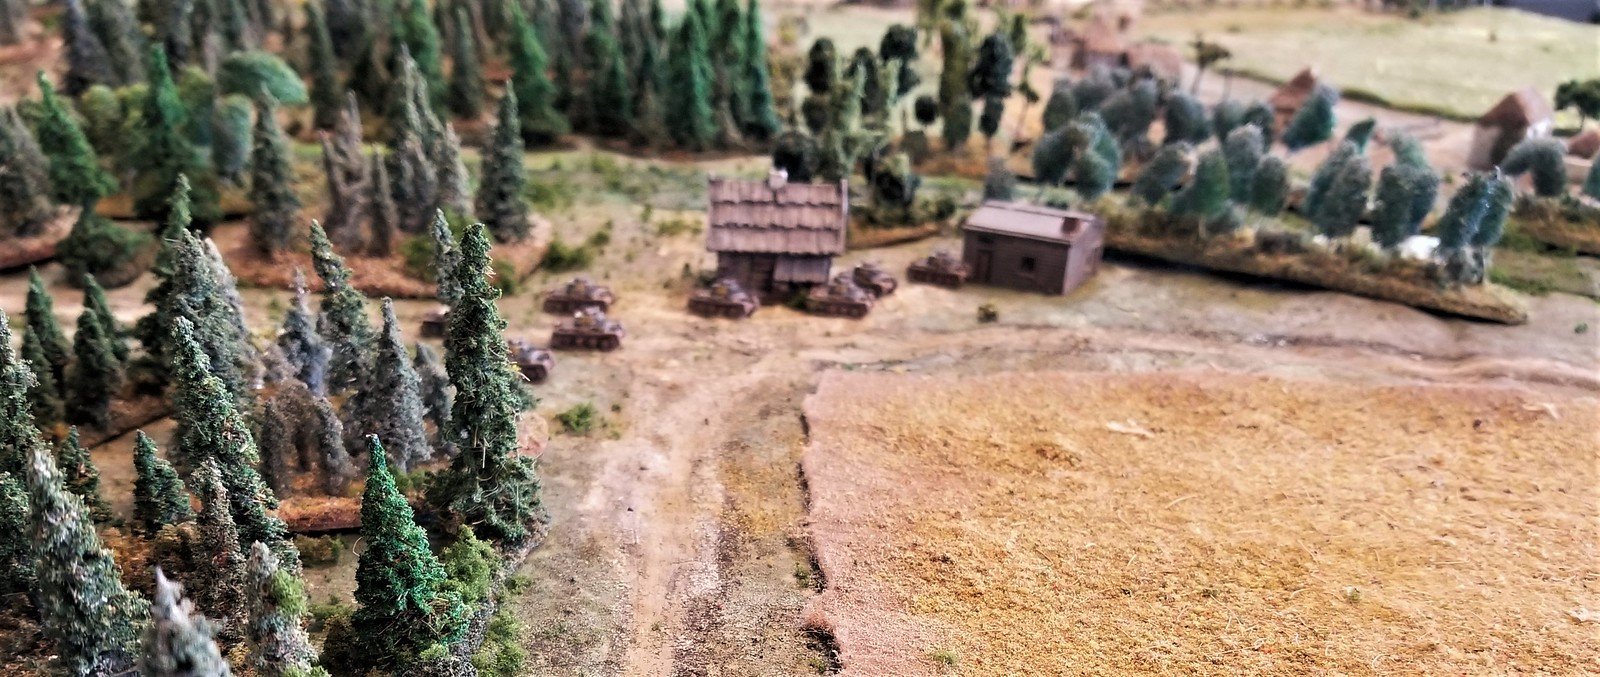 Germans exit from the road through the wood